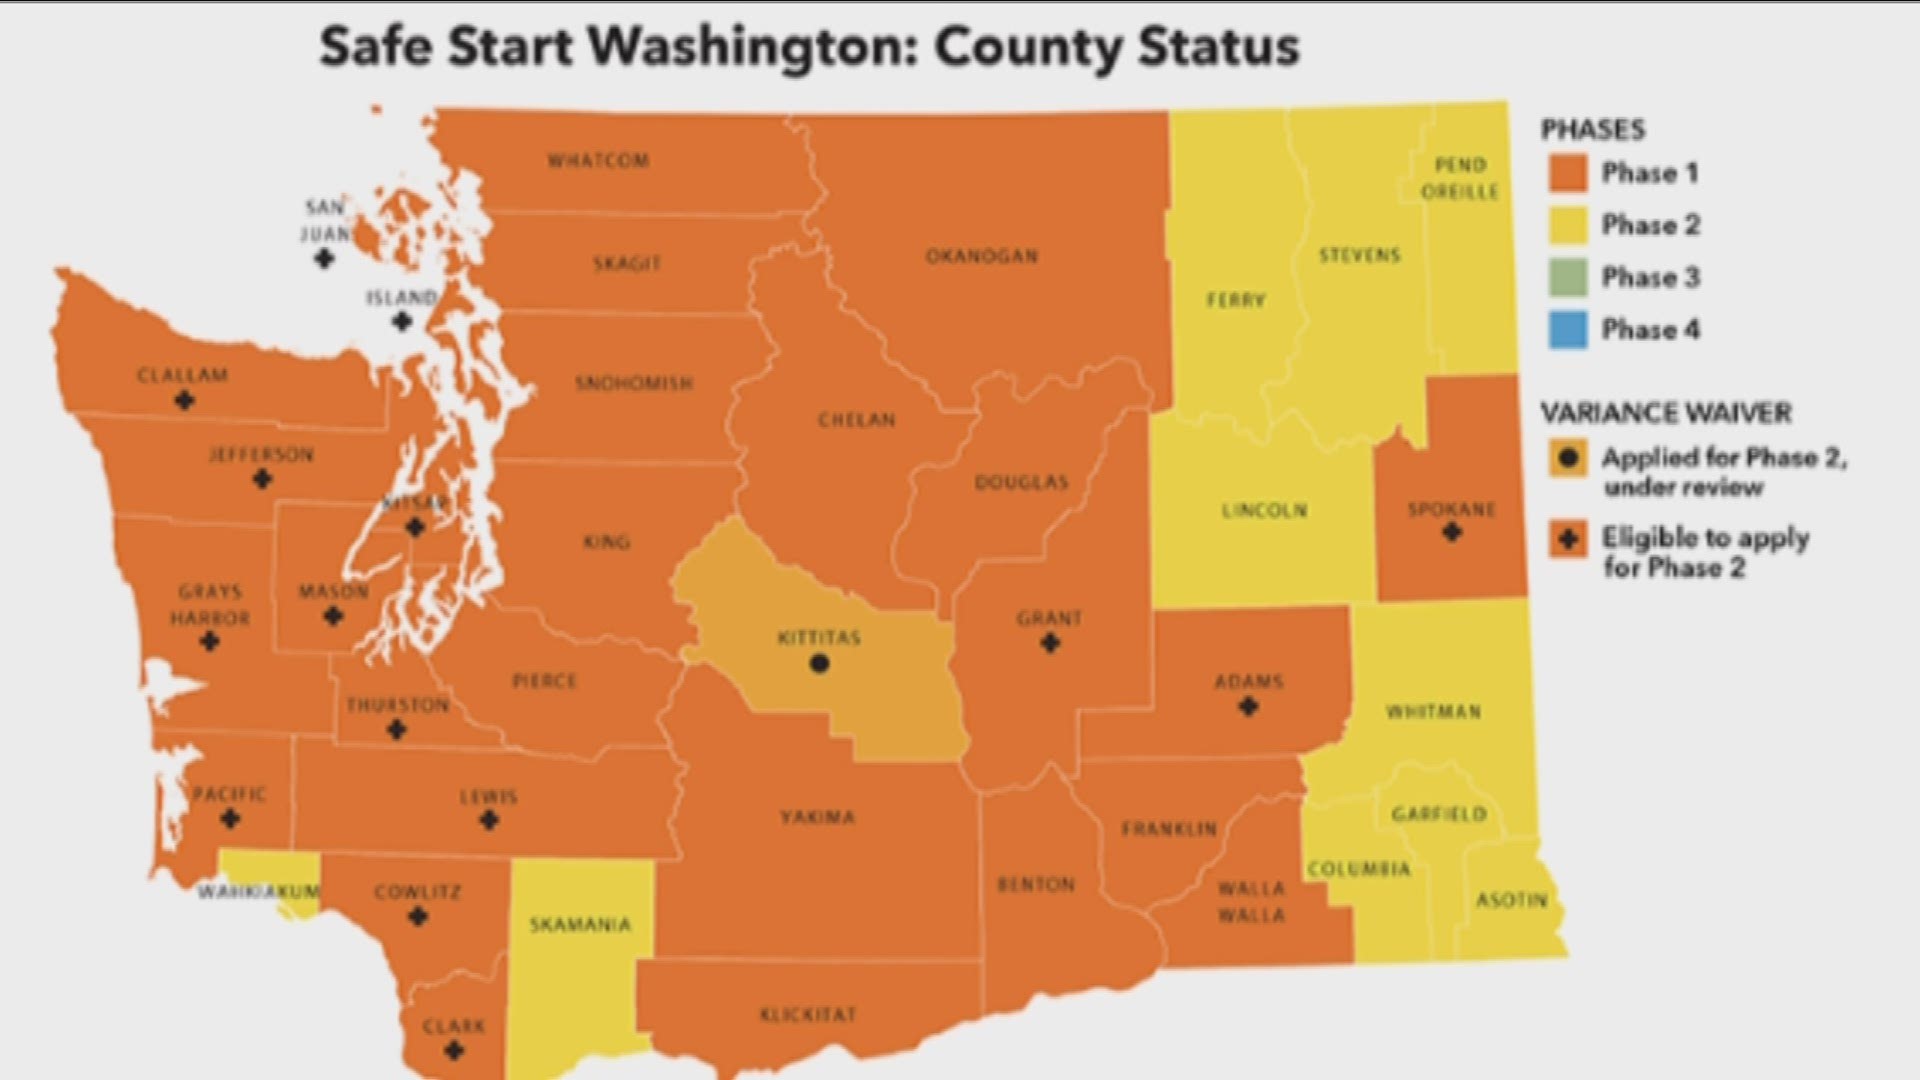 Asotin County joined a list of nine Washington counties that have been approved to move to Phase 2 of Gov. Inslee's reopening plan.